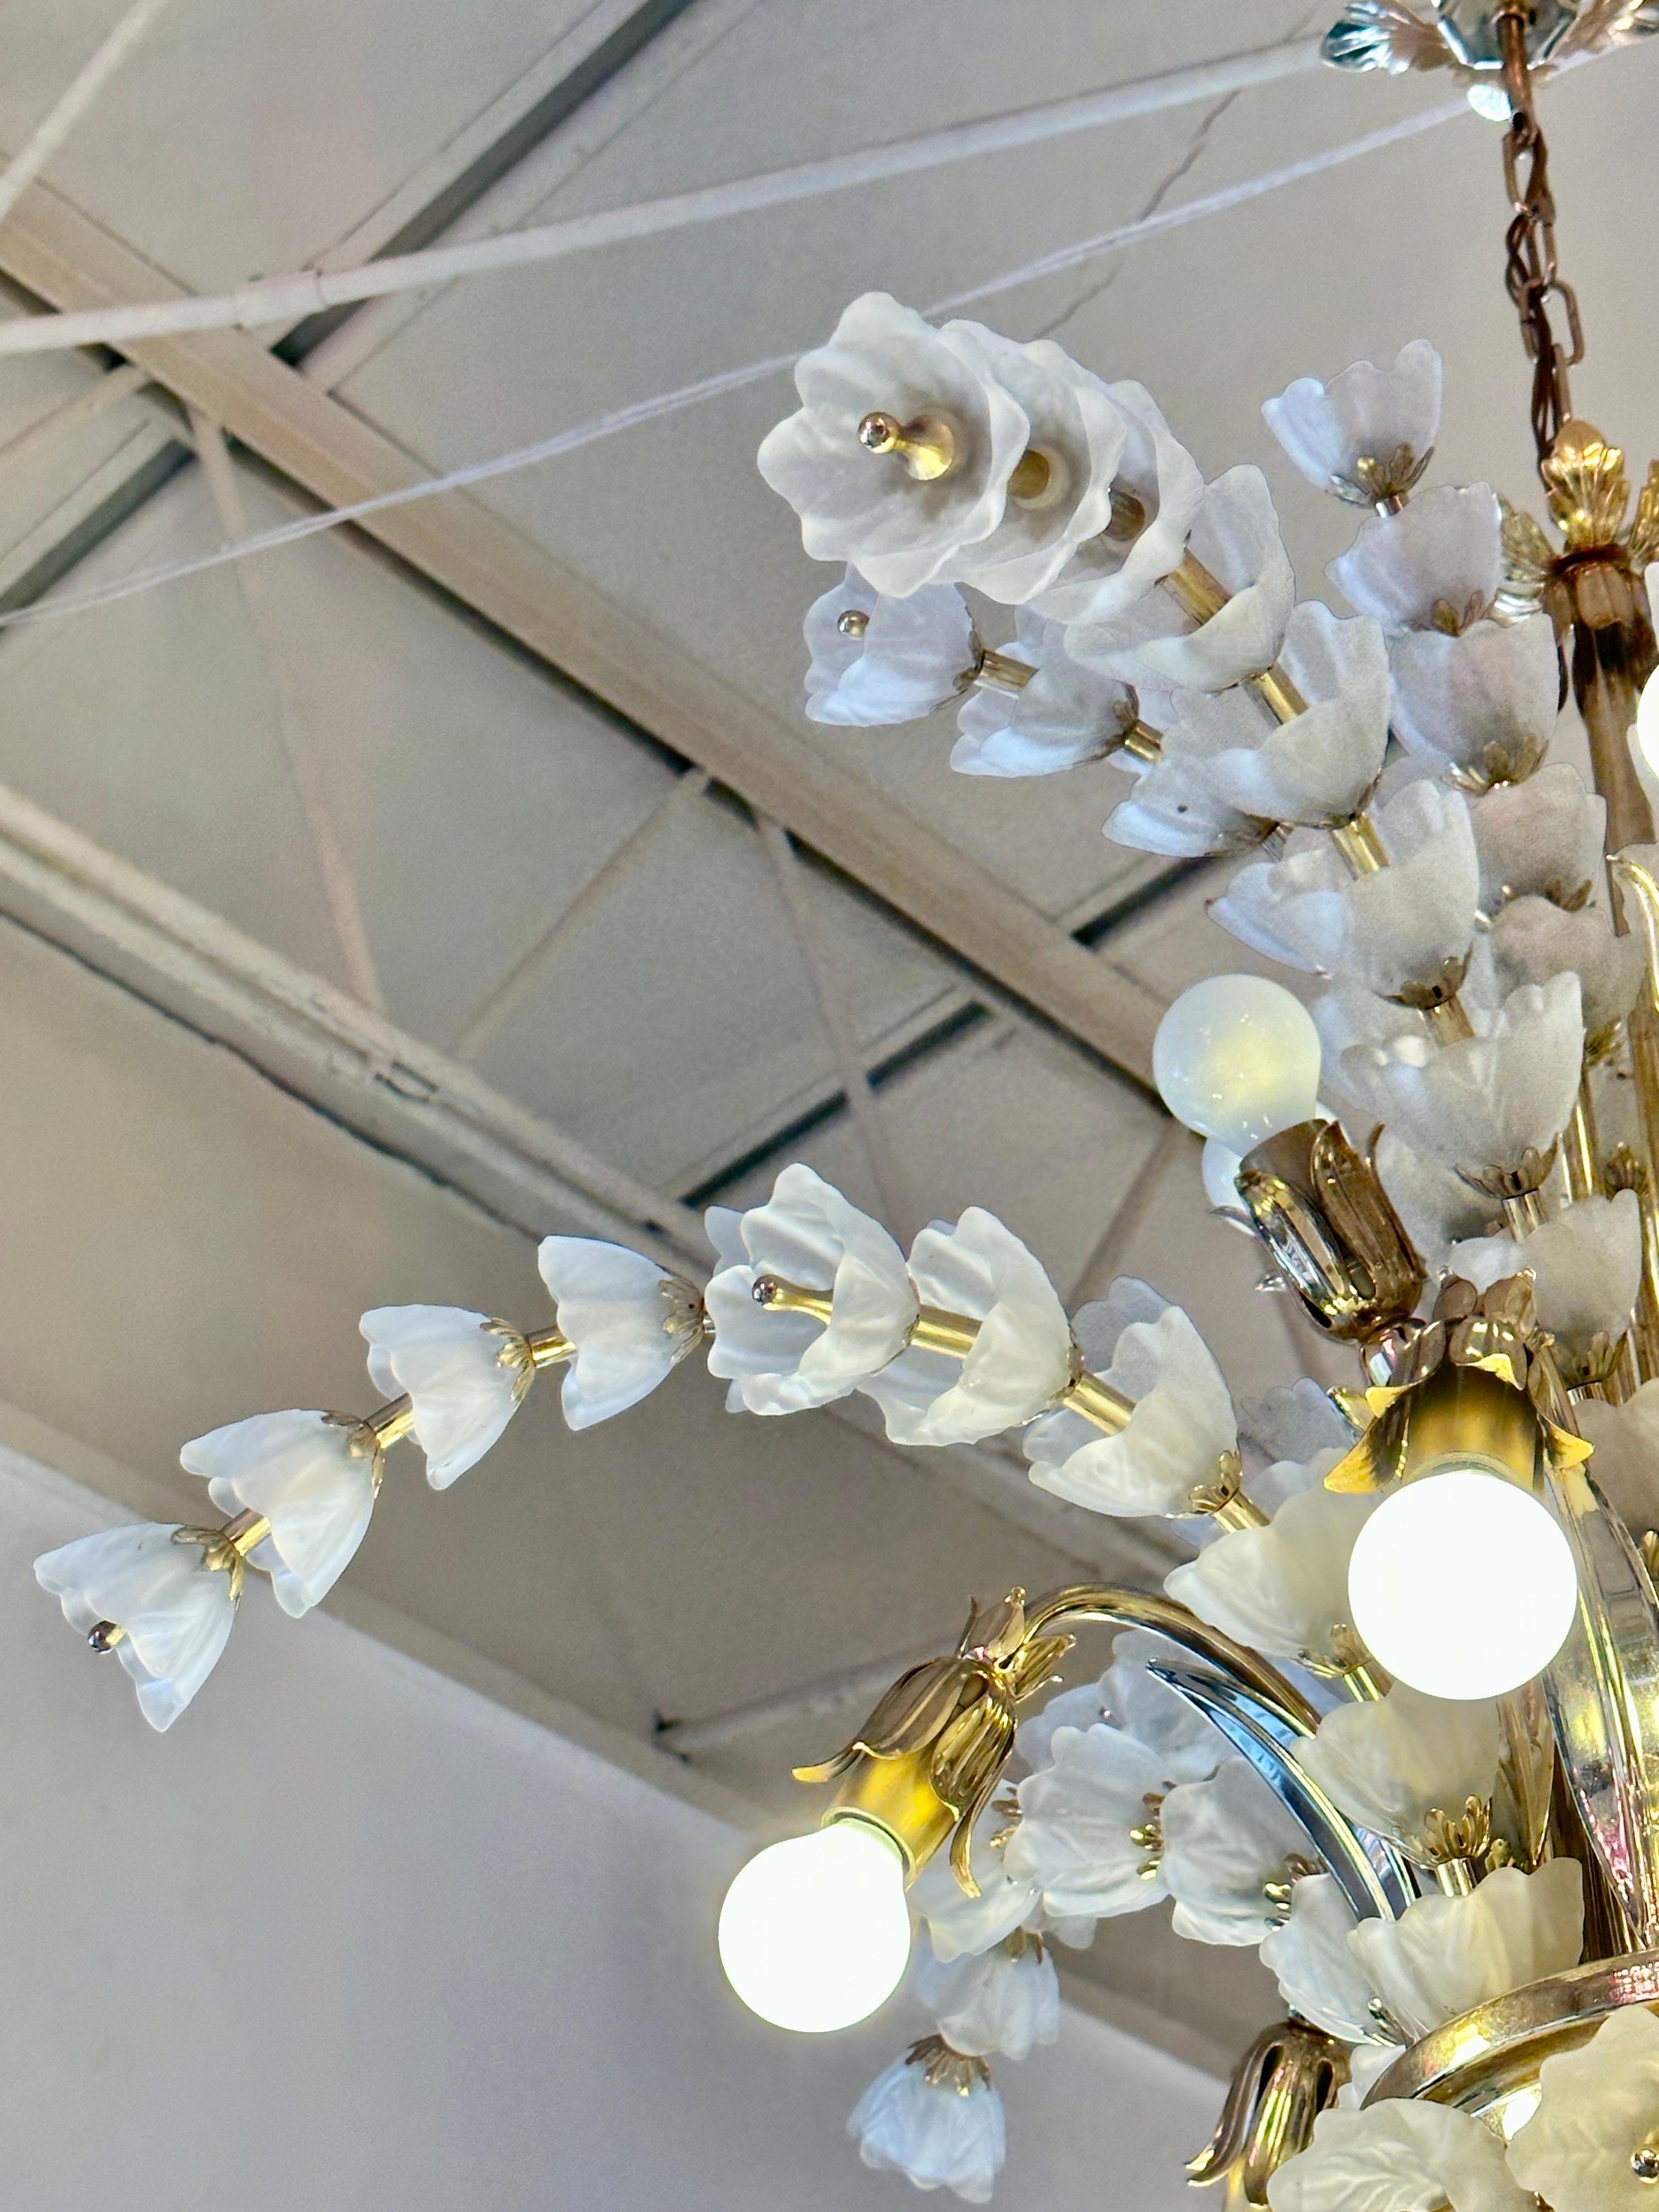 Gold plated metal and white frosted glass bell shaped flower bulbs on all arms.  Petite globe bulbs compliment the look of this chandelier.  Very unique and whimsical.